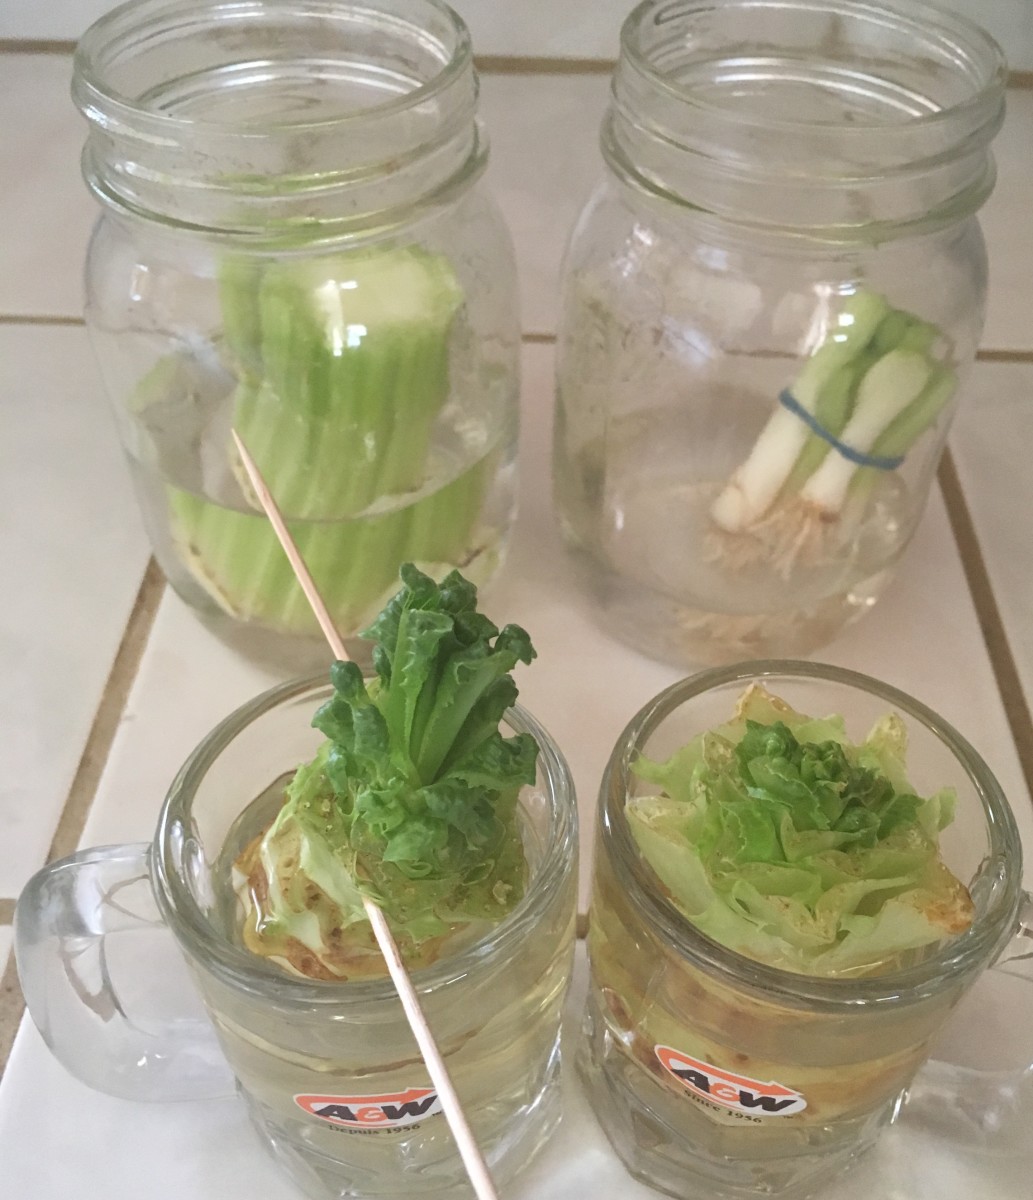 Here's how the celery, green onion, and lettuce should be prepared and "stored" so that they can start growing.